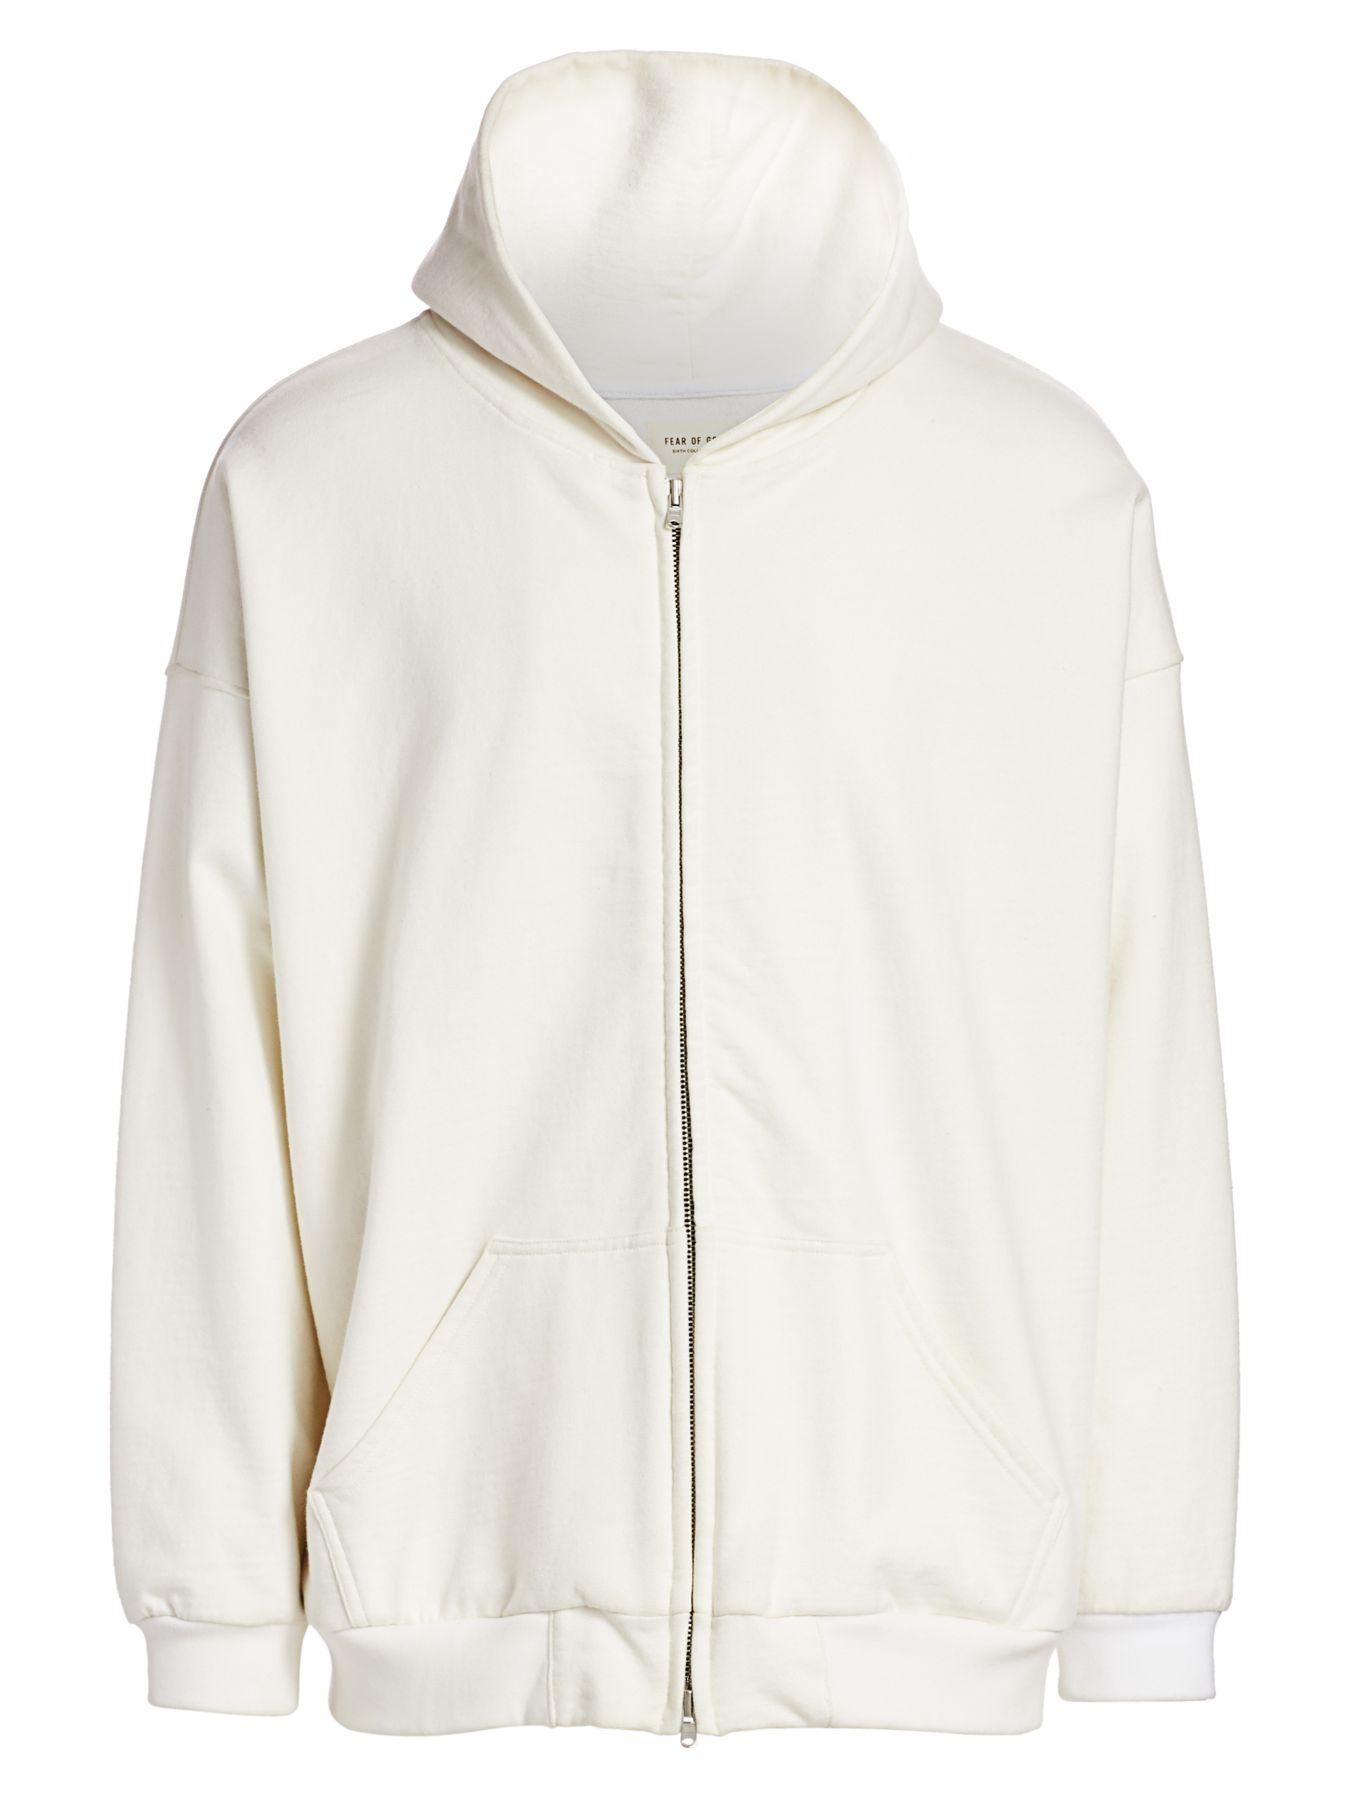 Fear Of God Everyday Cotton Zip Hoodie in White for Men - Lyst